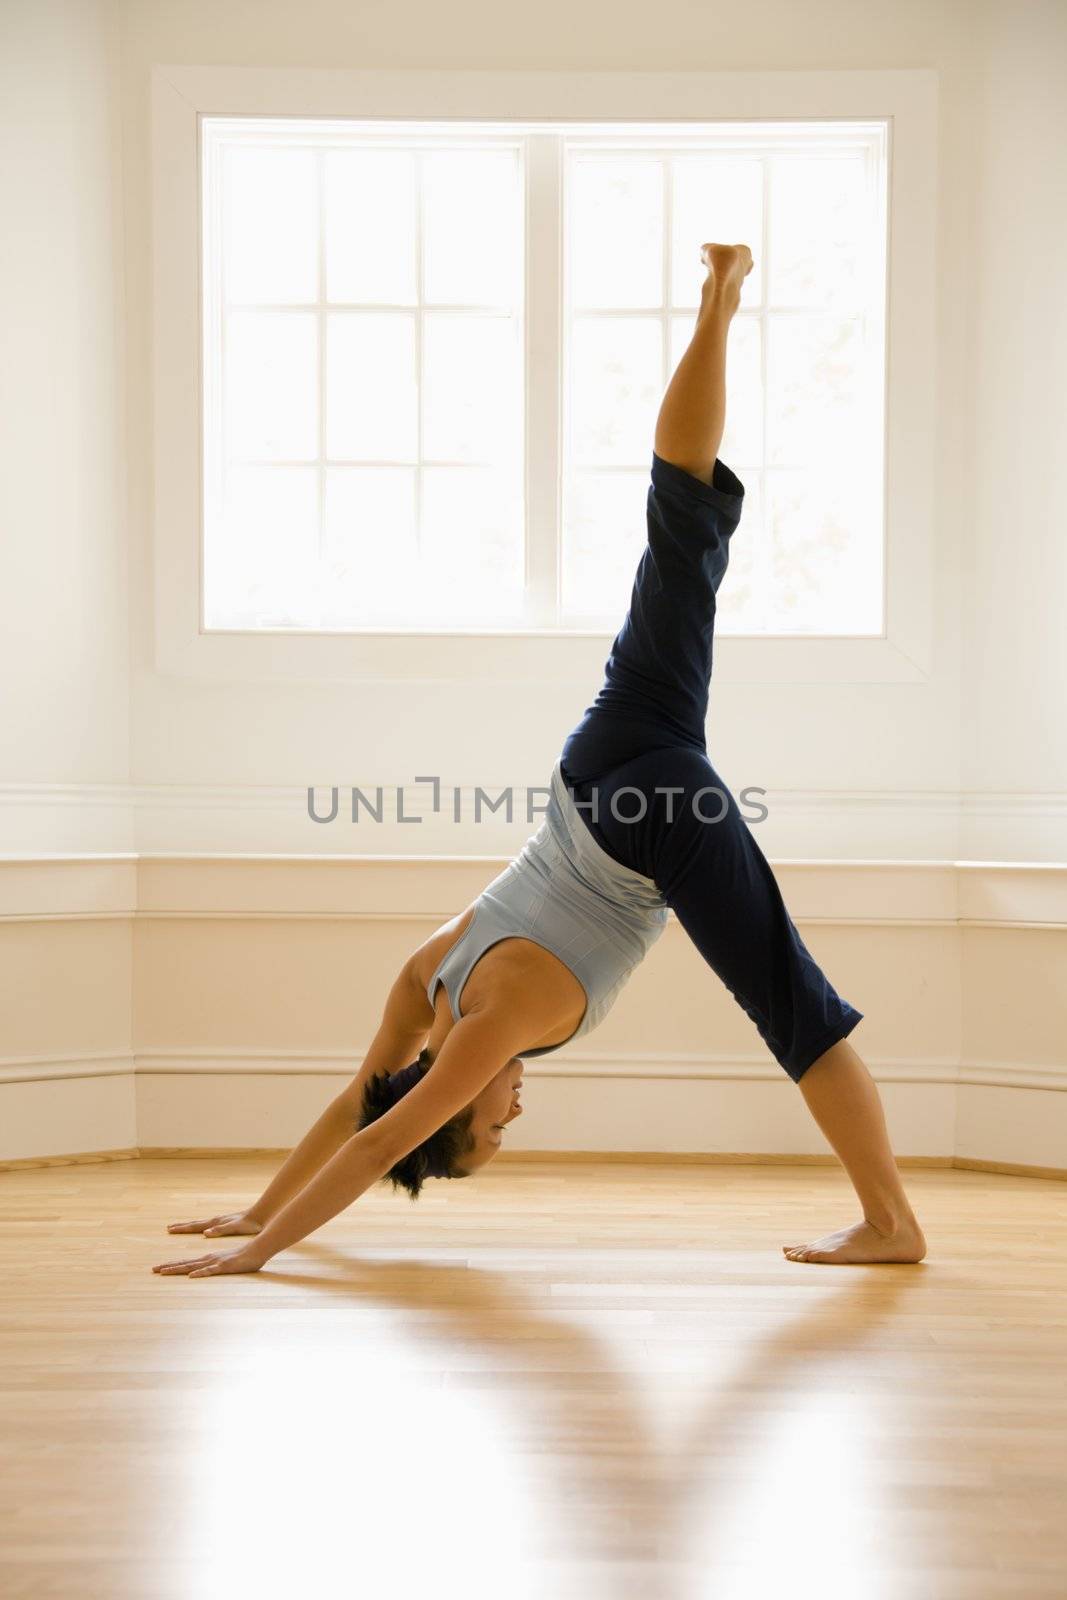 Young woman doing downward dog pose with one leg raised on wooden floor indoors by sunlit window.